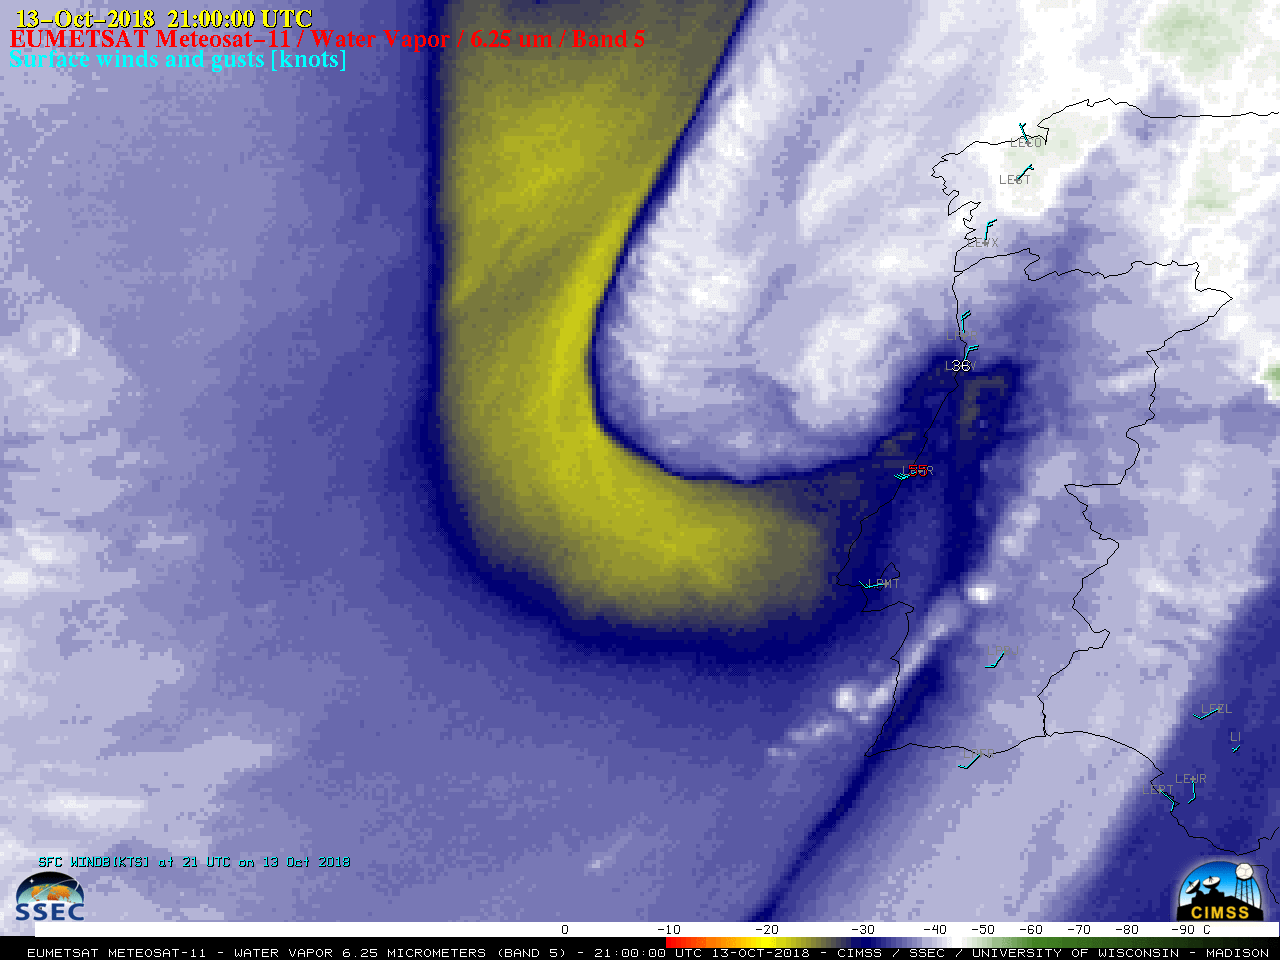 EUMETSAT Meteosat-11 Water Vapor (6.25 µm) images, with hourly plots of surface winds and gusts in knots [click to play animation | MP4]